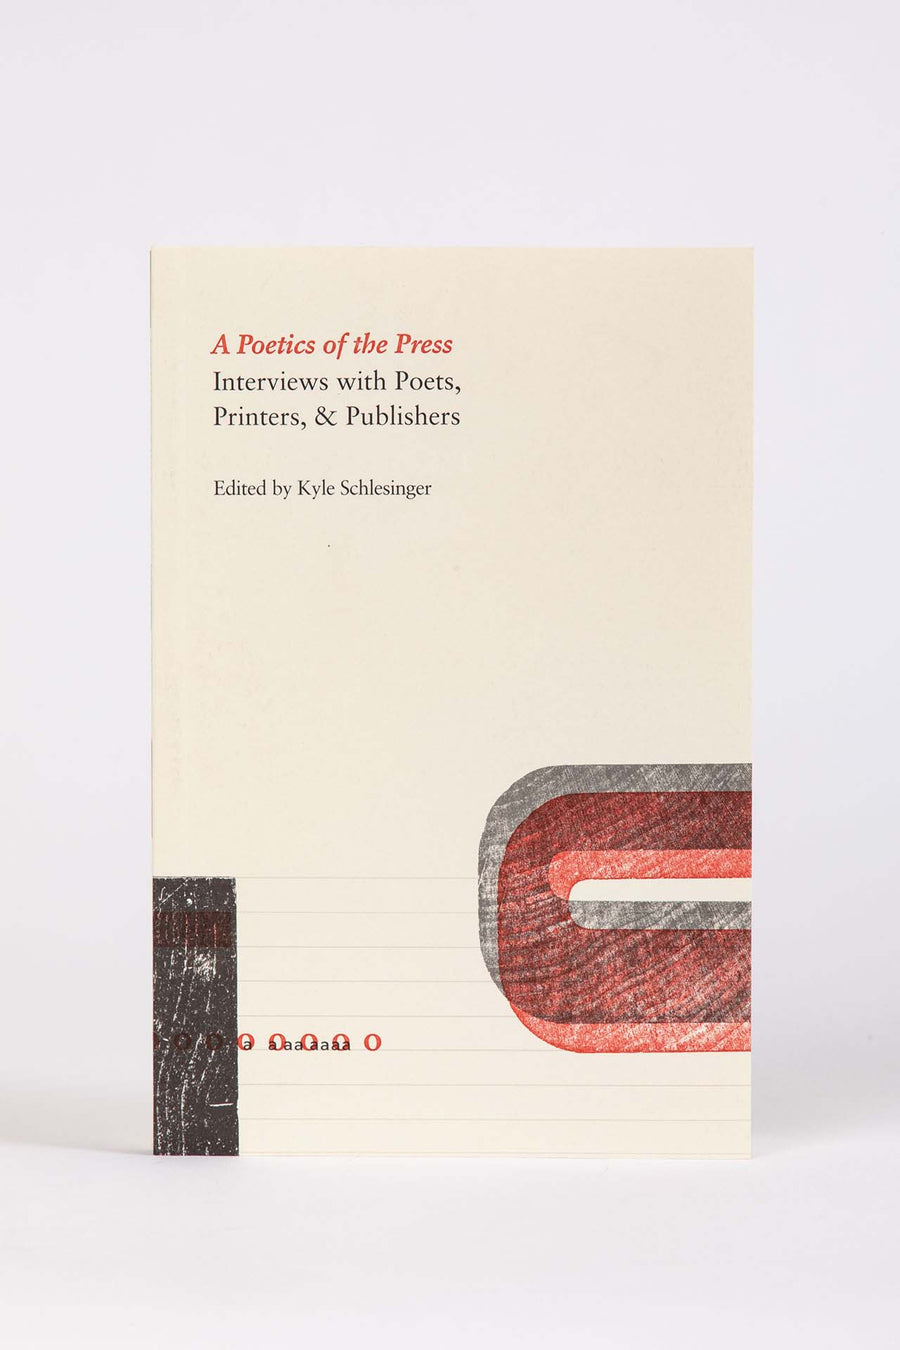 Kyle Schlesinger, ed. : A Poetics of the Press: Interviews with Poets, Printers, & Publishers